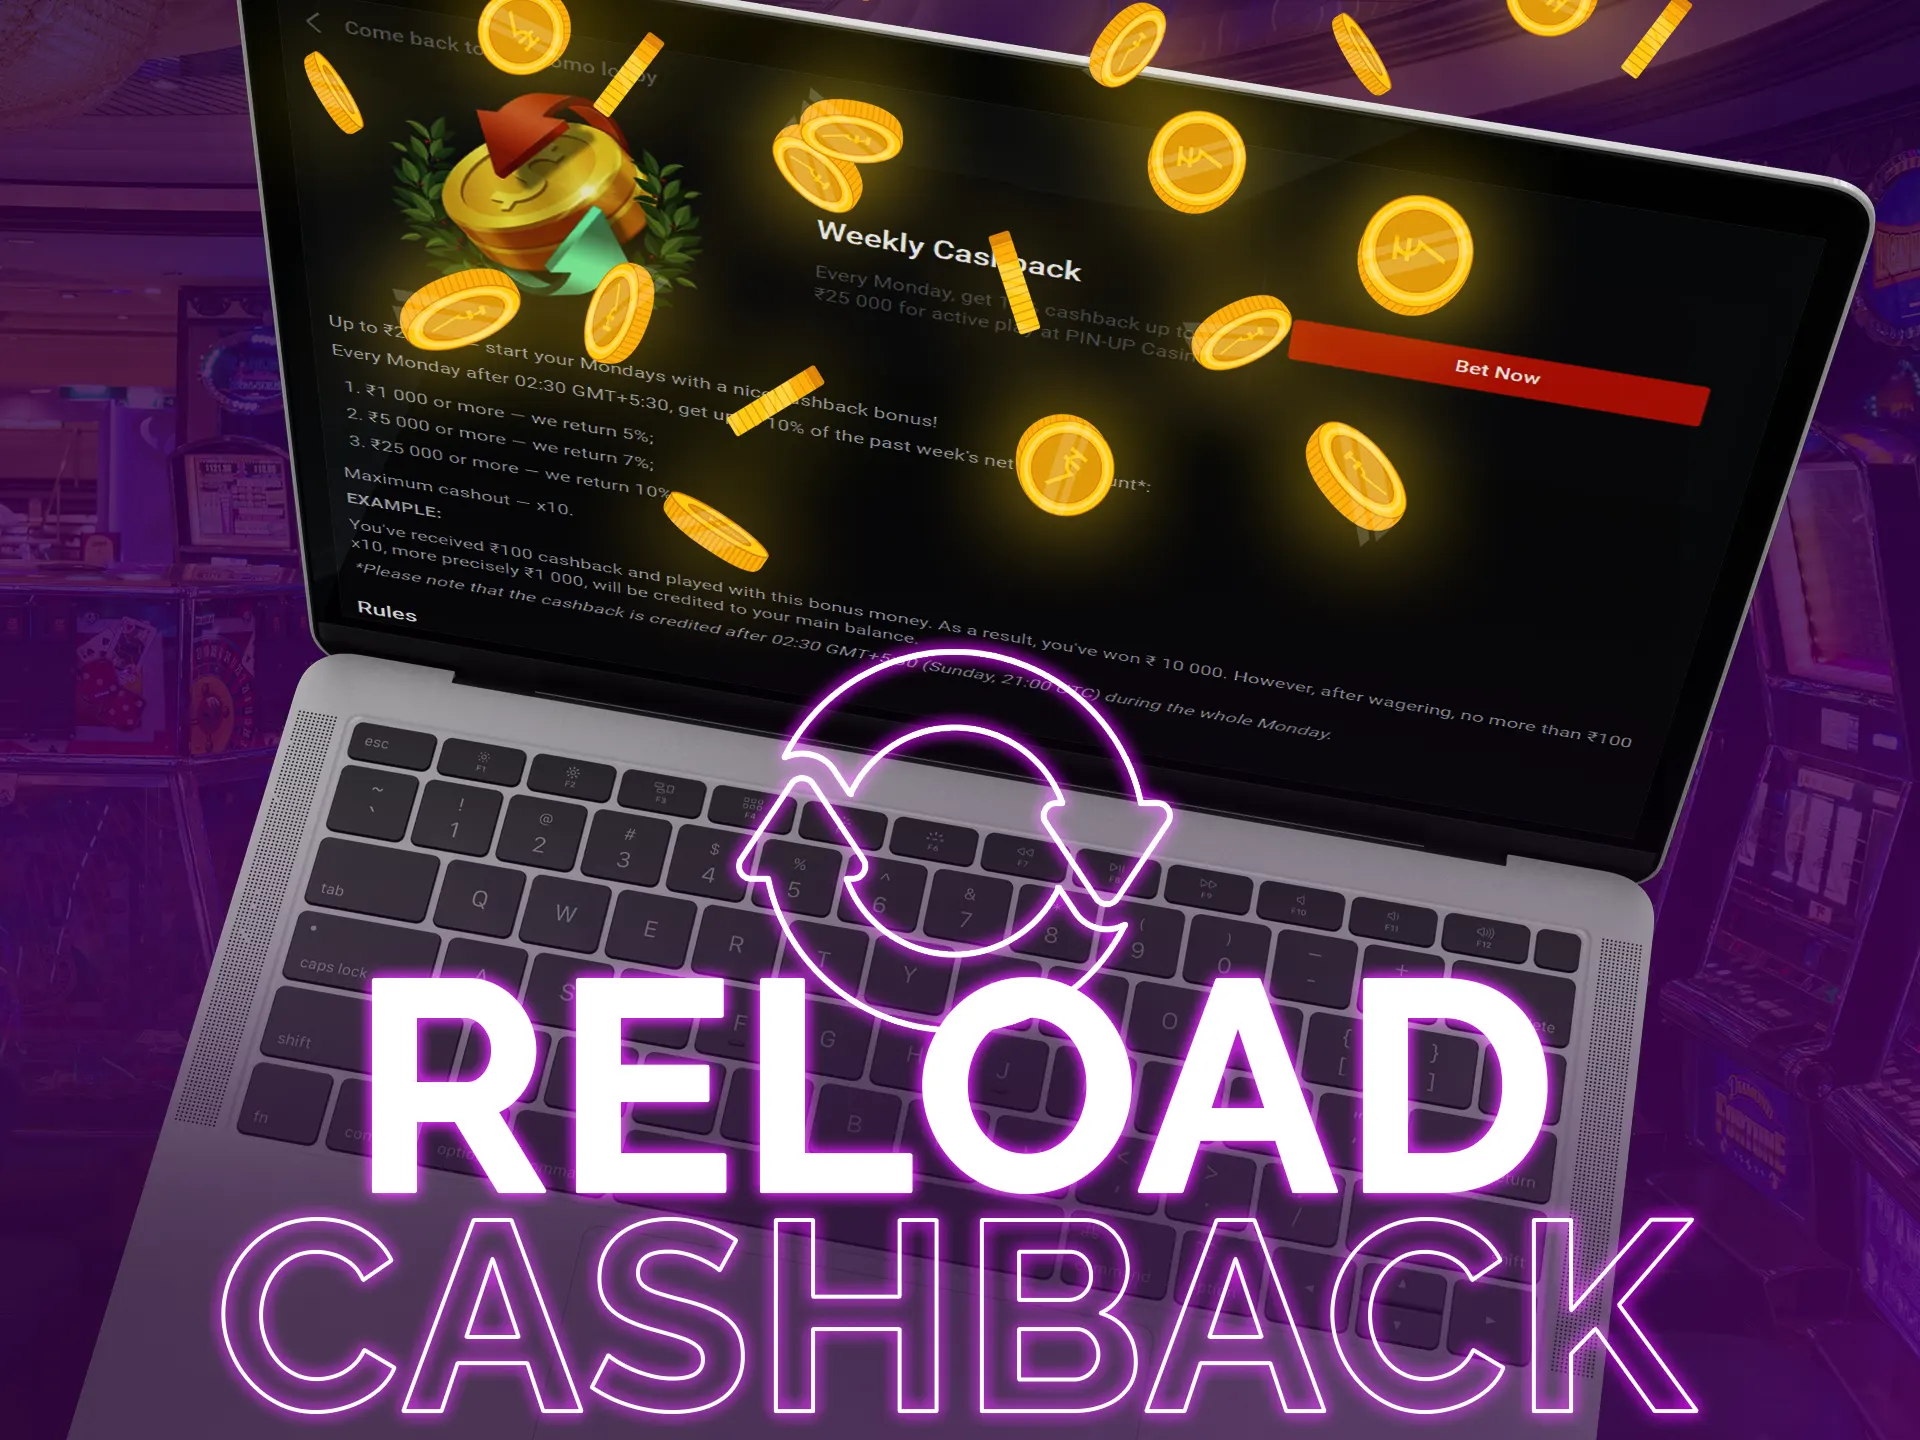 Use reload cashback when you spent your first deposit.